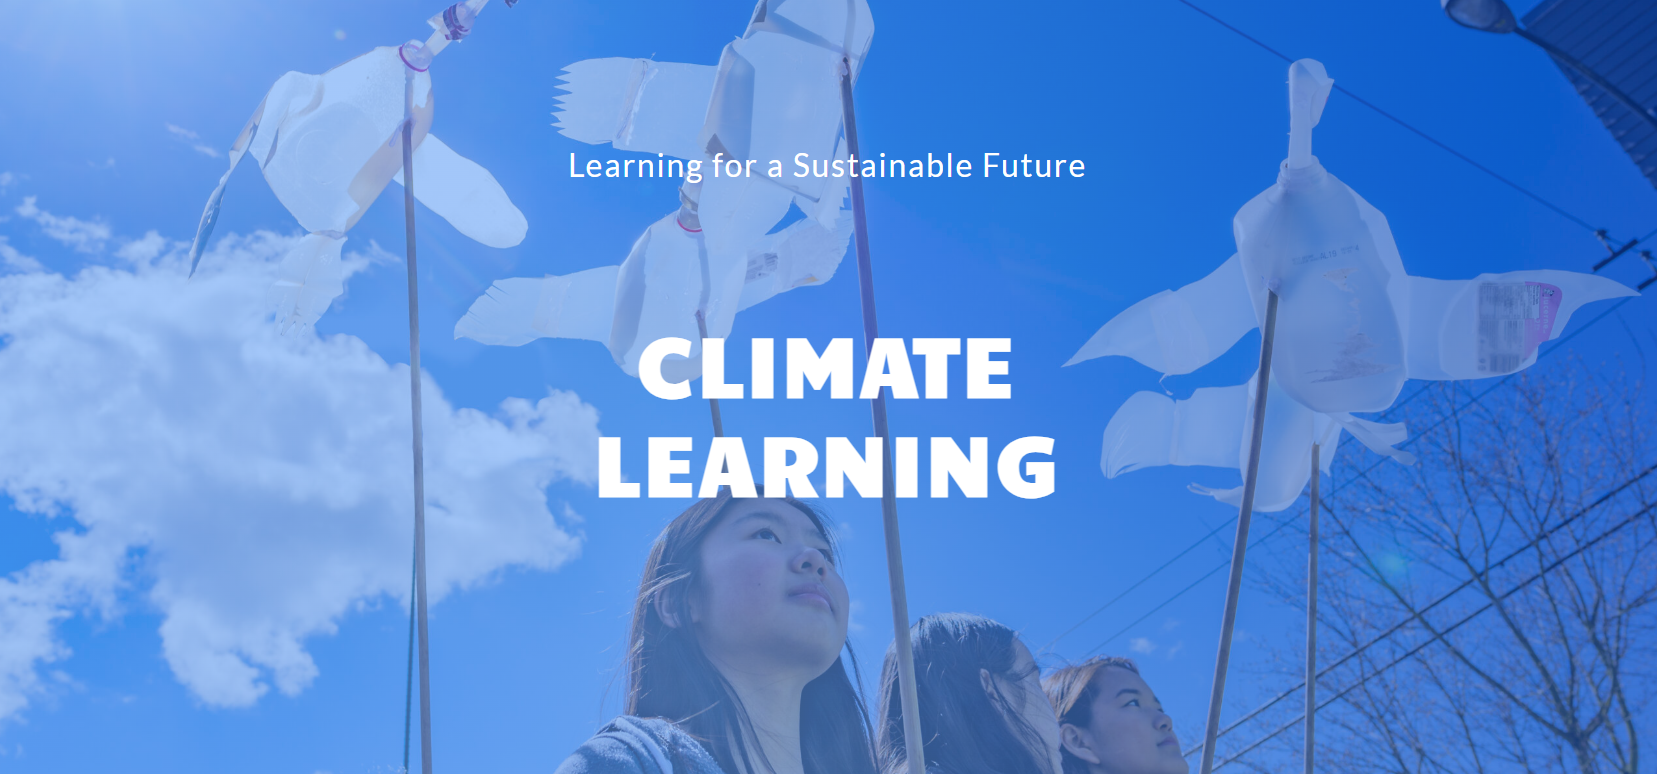 Empowering Learners in a Warming World